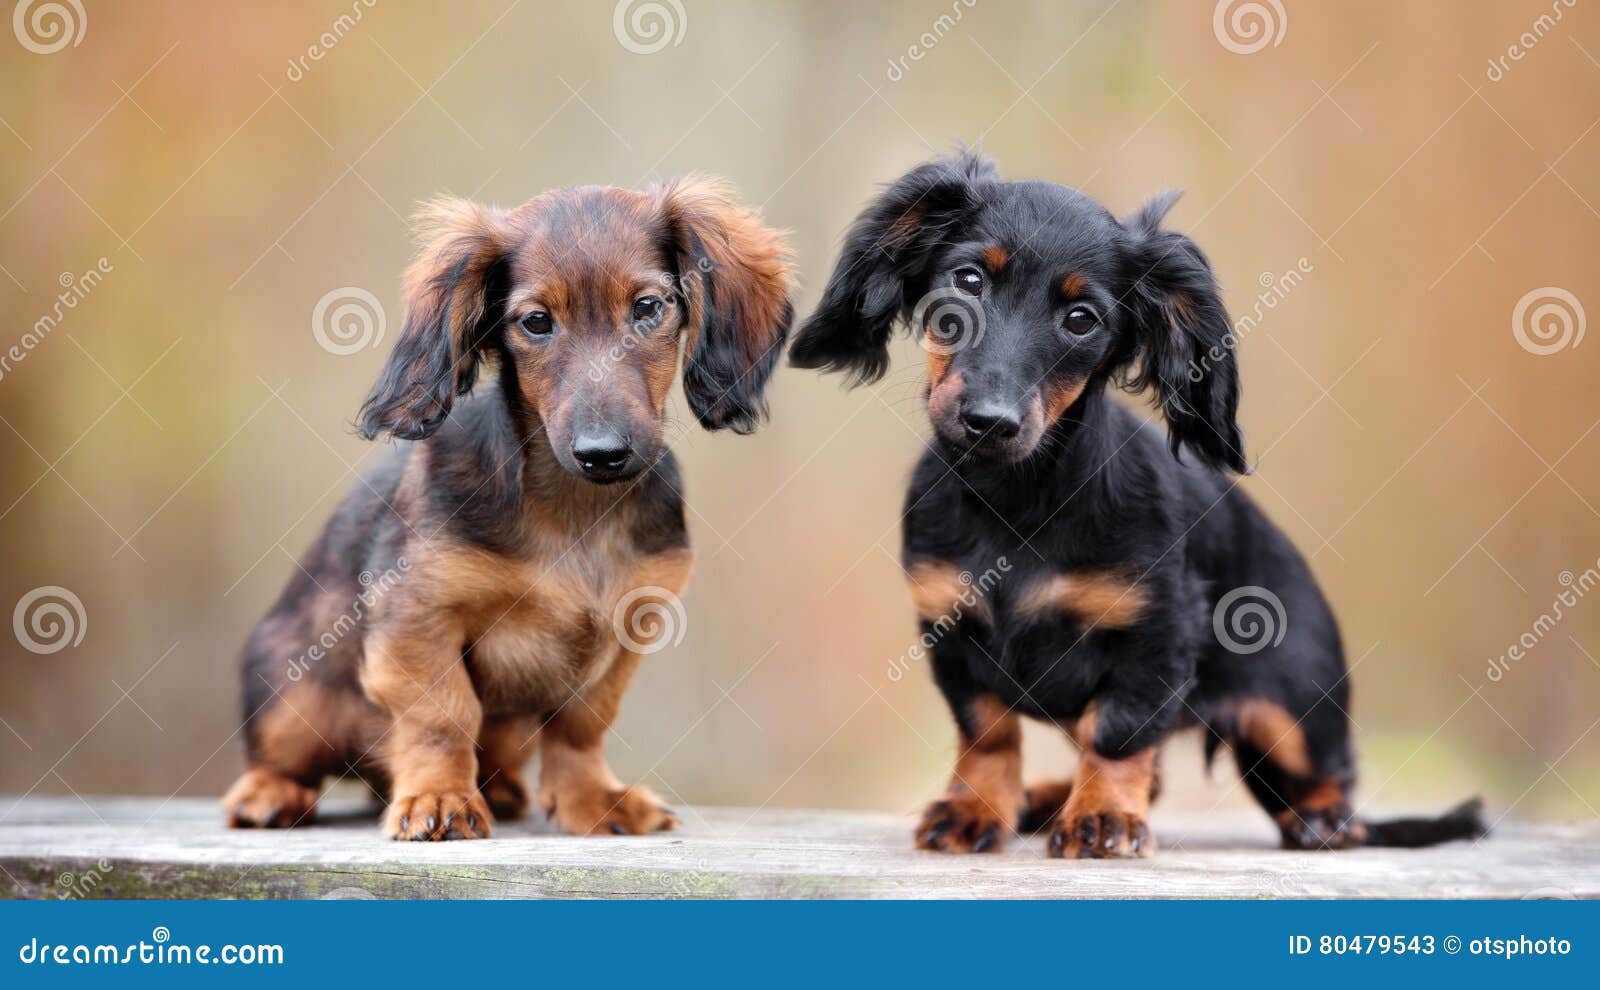 Two Dachshund Puppies Sitting Outdoors Stock Image - Image of friend,  animal: 80479543